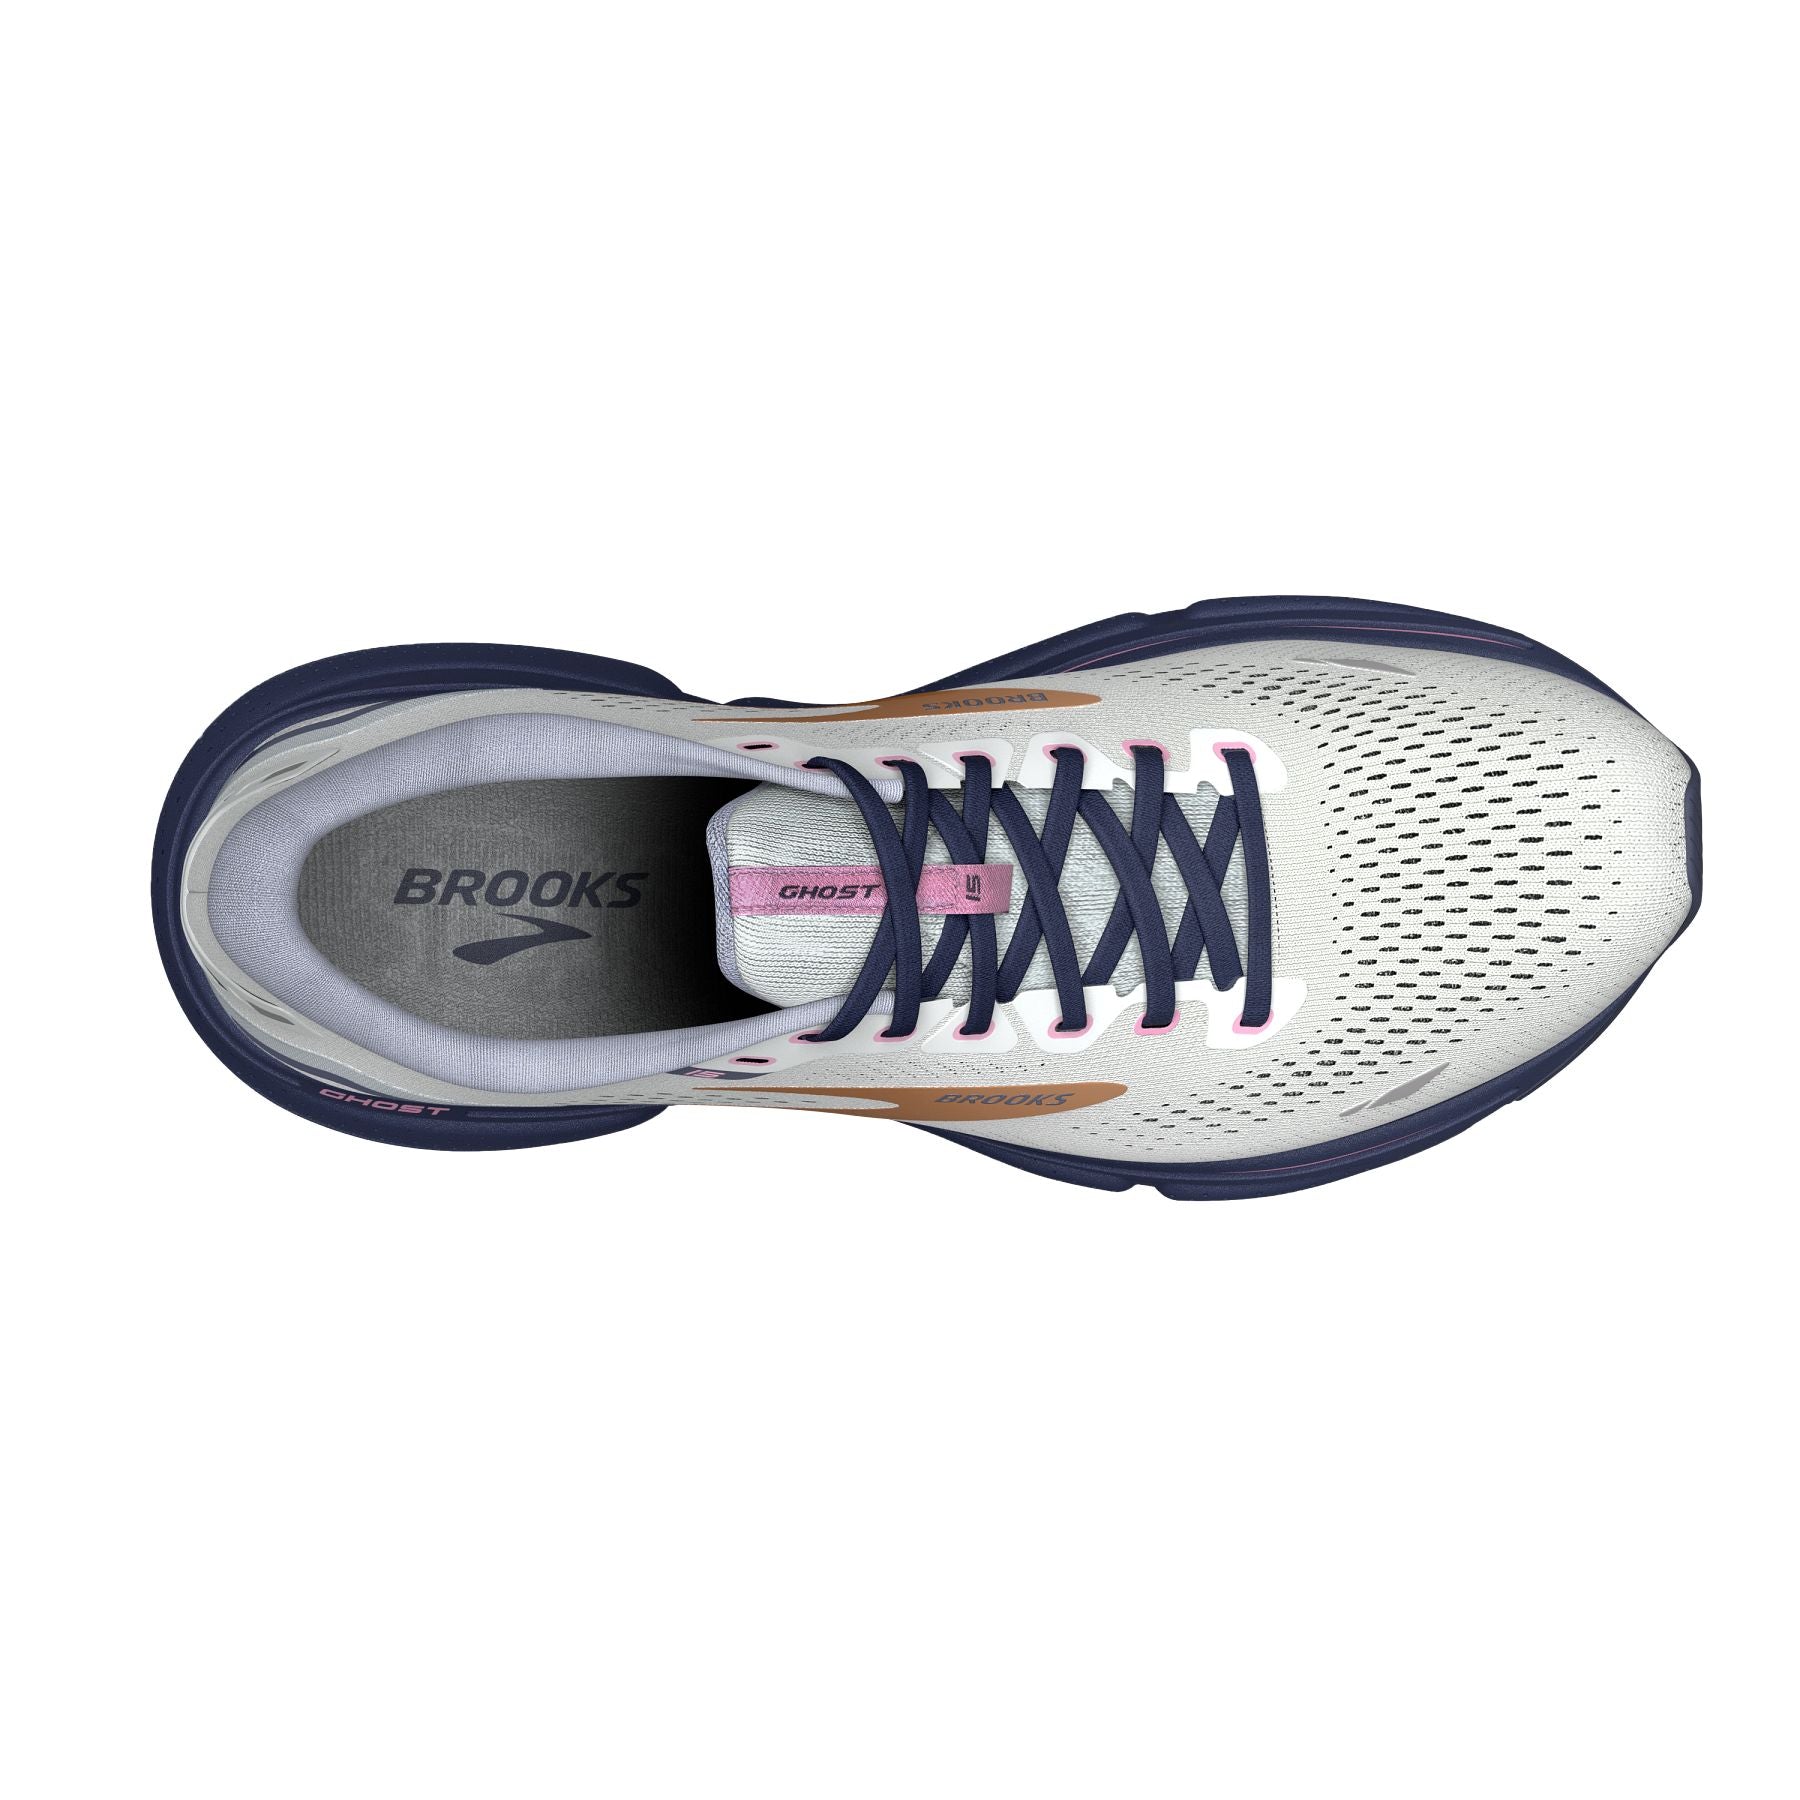 Top view of the Brooks Women's Ghost 15 in Spa Blue/NeoPink/Copper